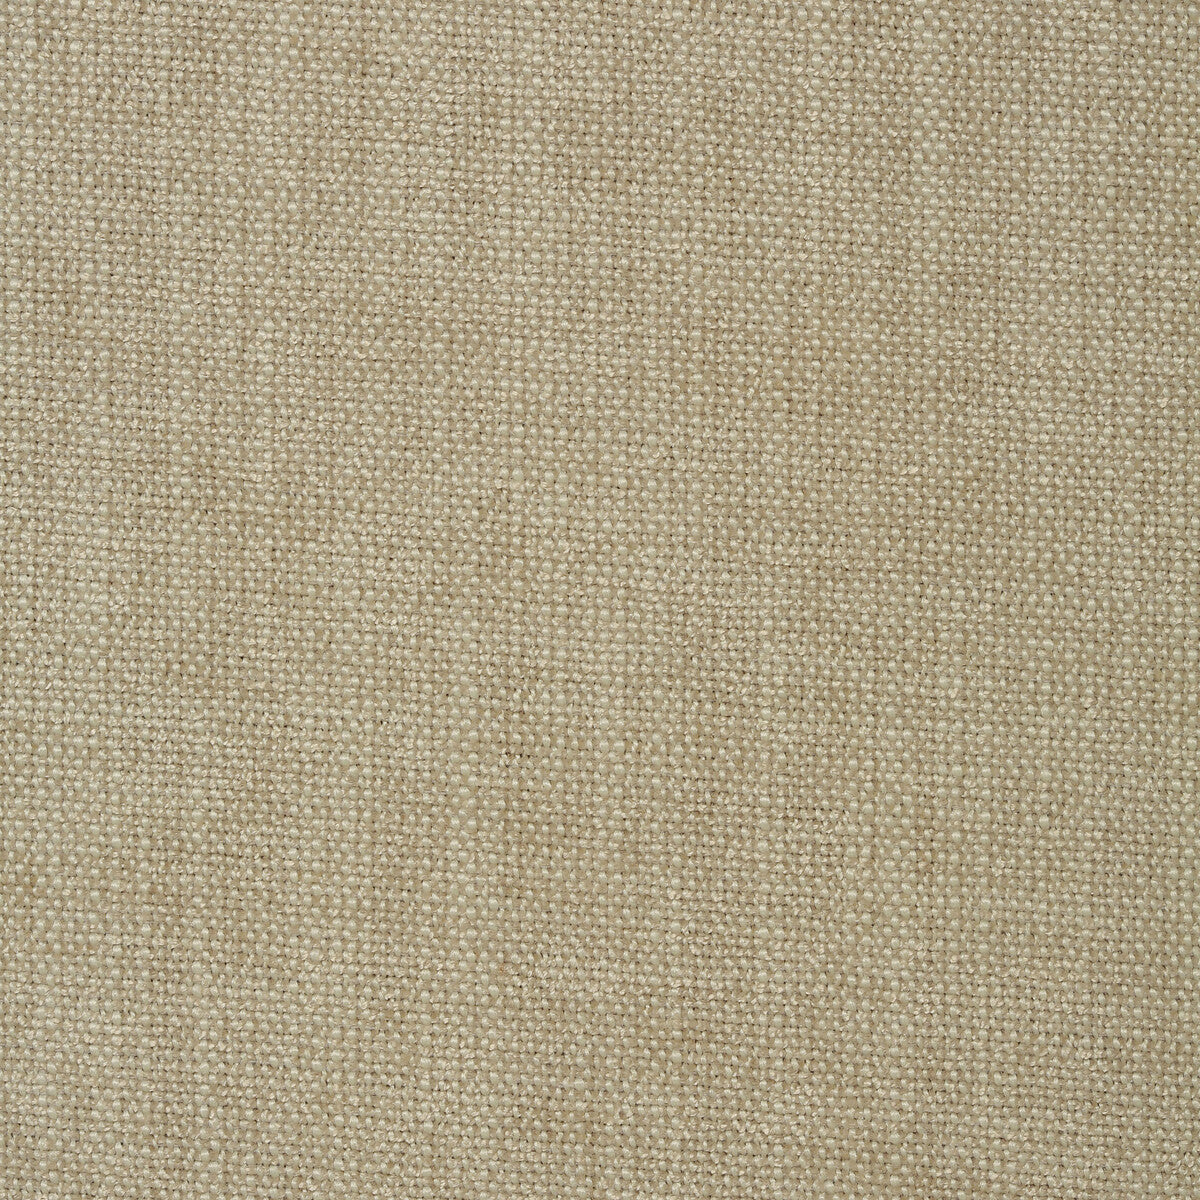 Kravet Smart fabric in 35113-106 color - pattern 35113.106.0 - by Kravet Smart in the Performance Crypton Home collection